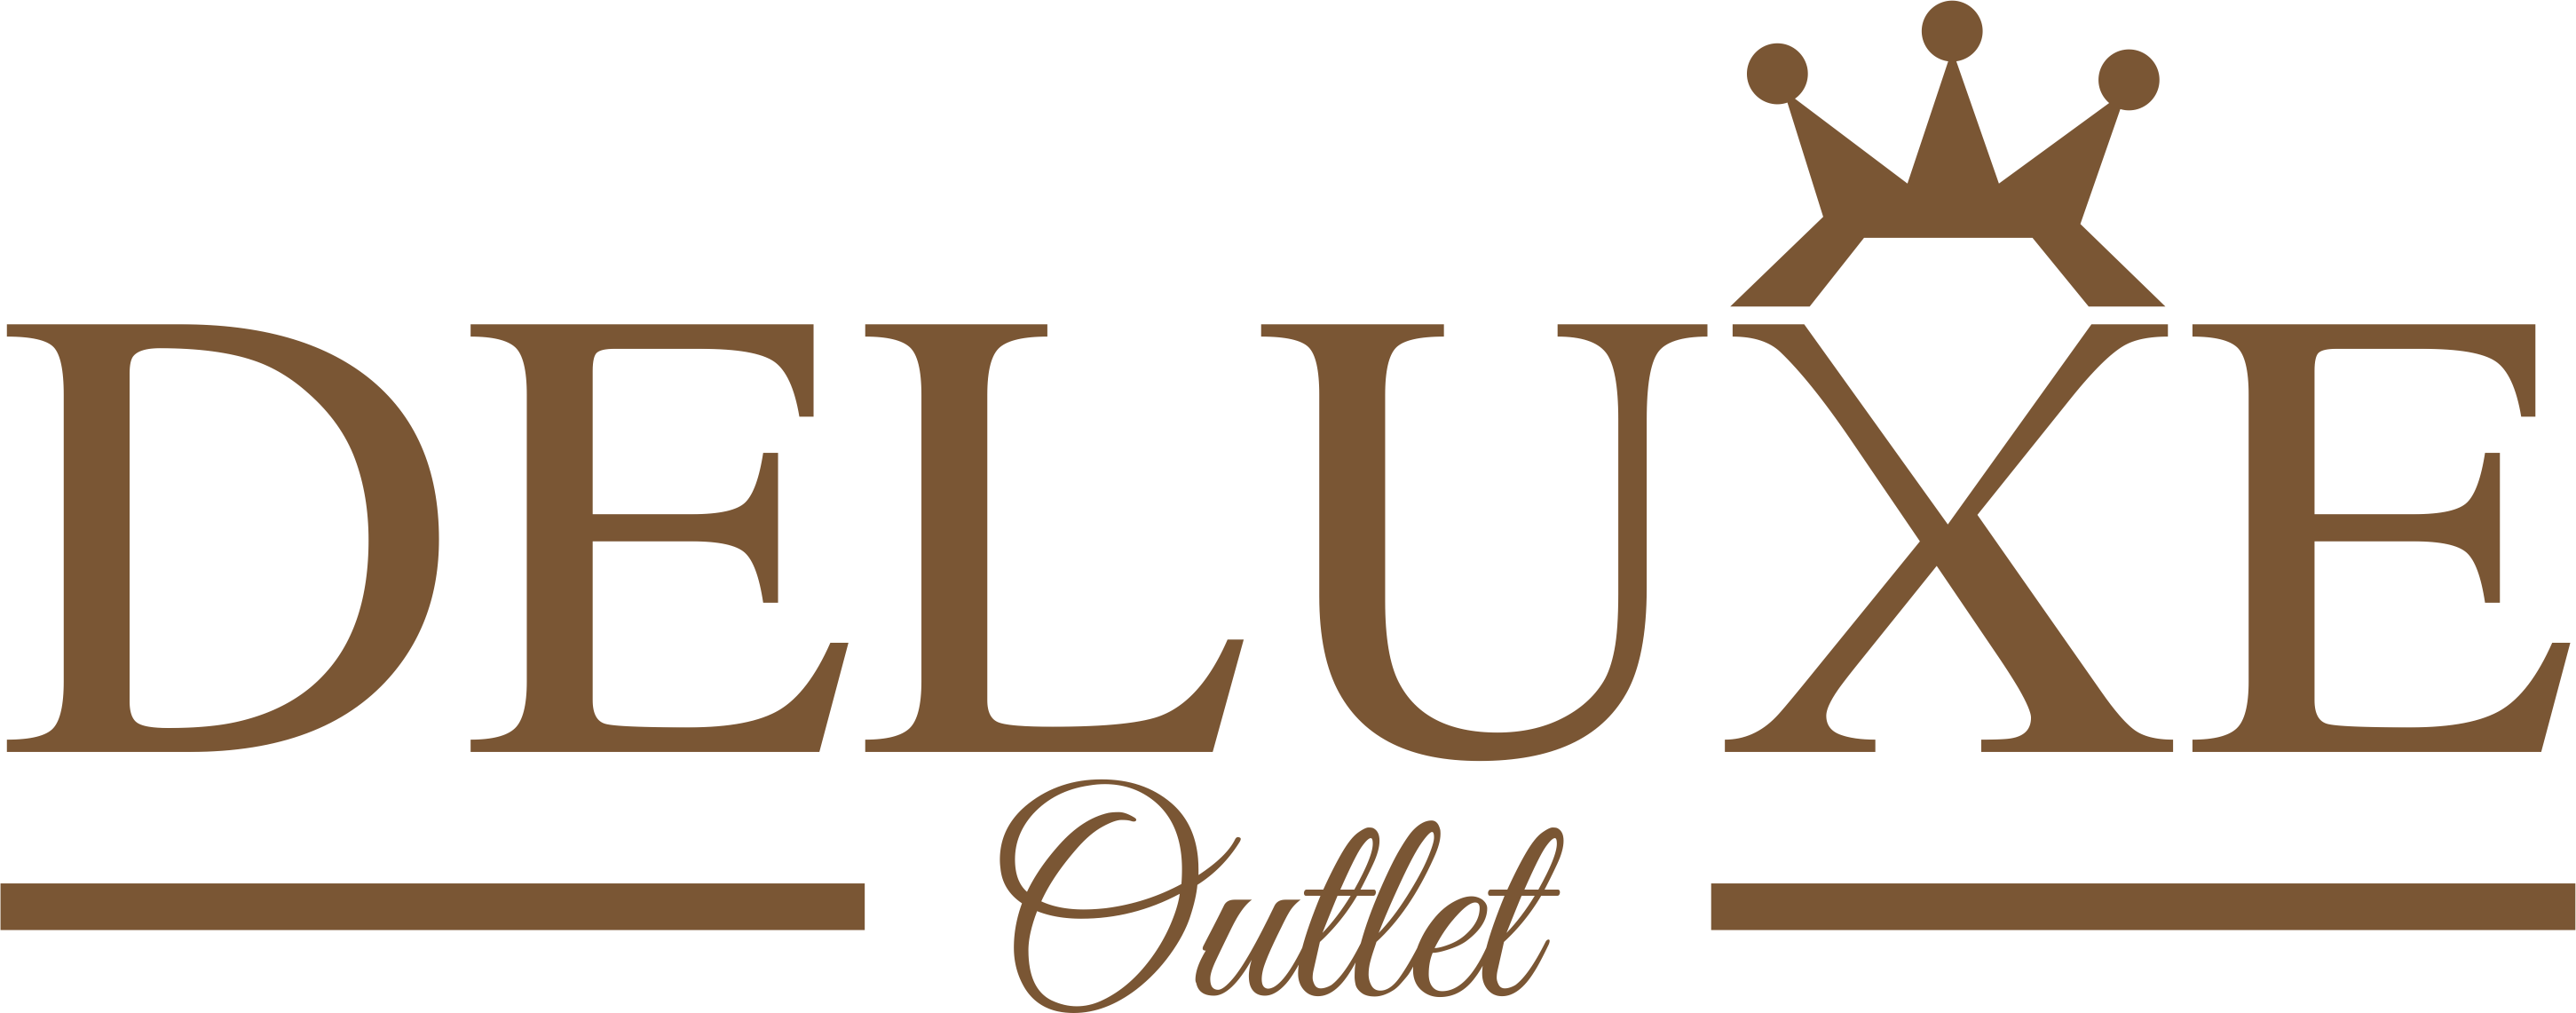 Deluxe Outlet